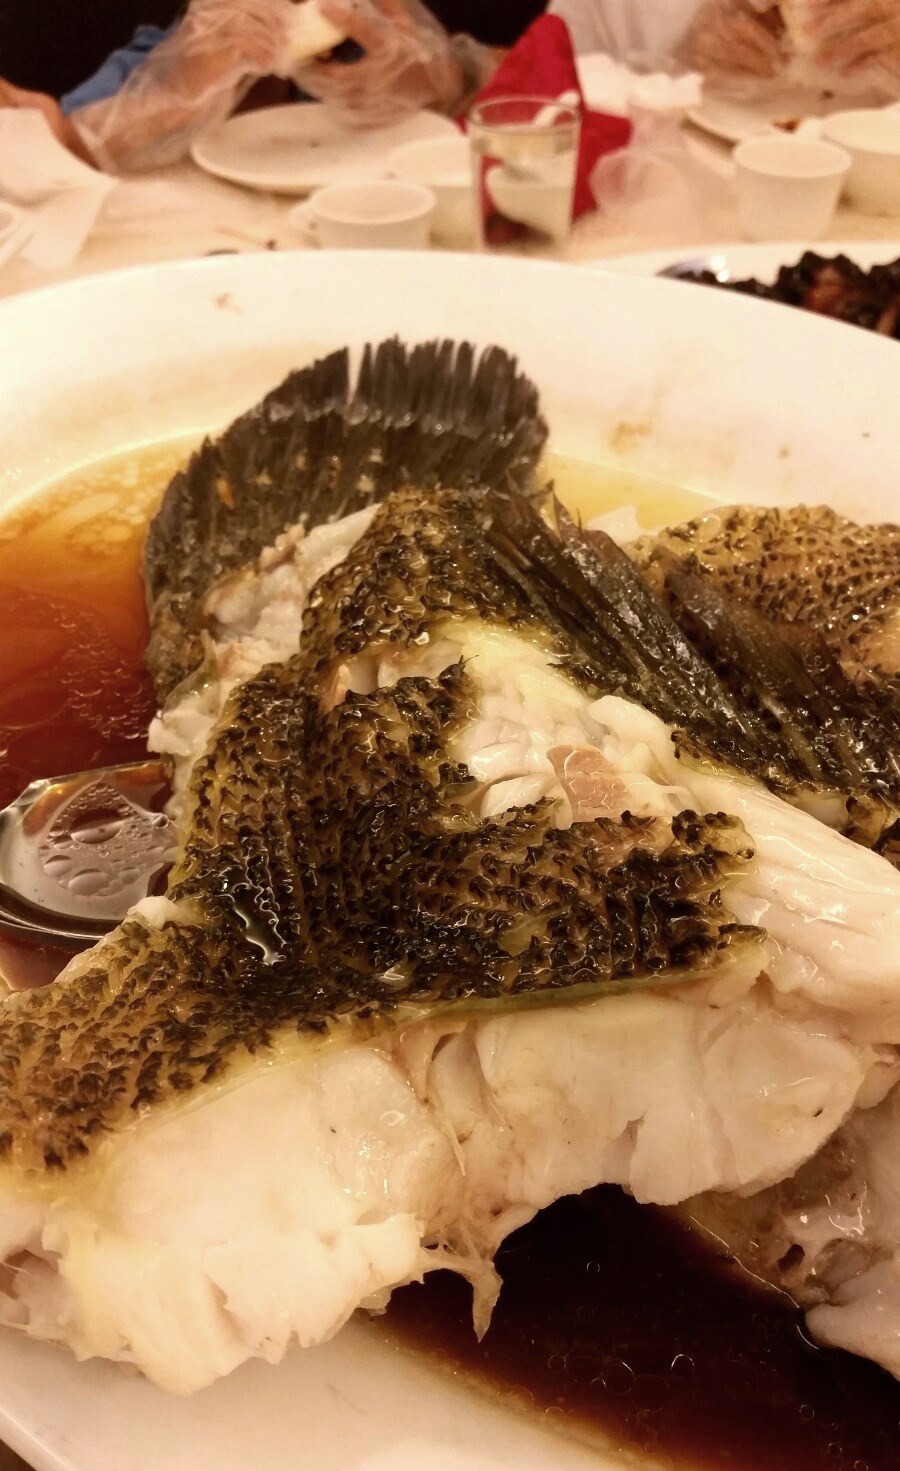 Steamed soon hock / marble goby fish Cantonese style RM475 / A$160